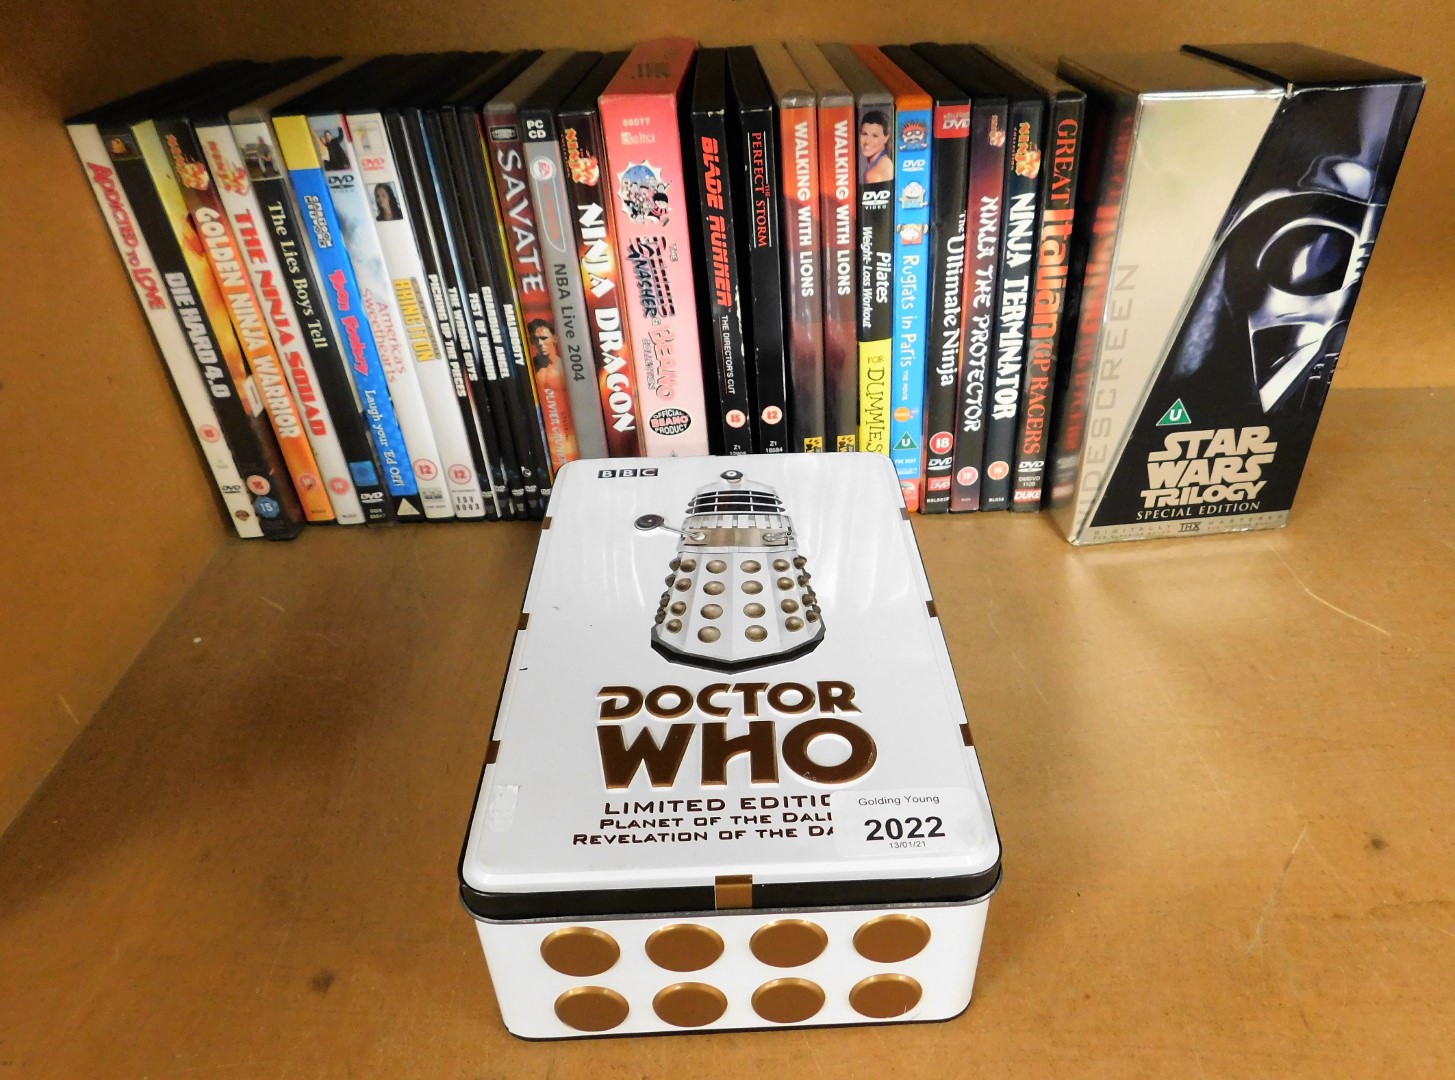 A quantity of DVDs and videos, to include Star Wars Trilogy Special Edition, A Doctor Who limited